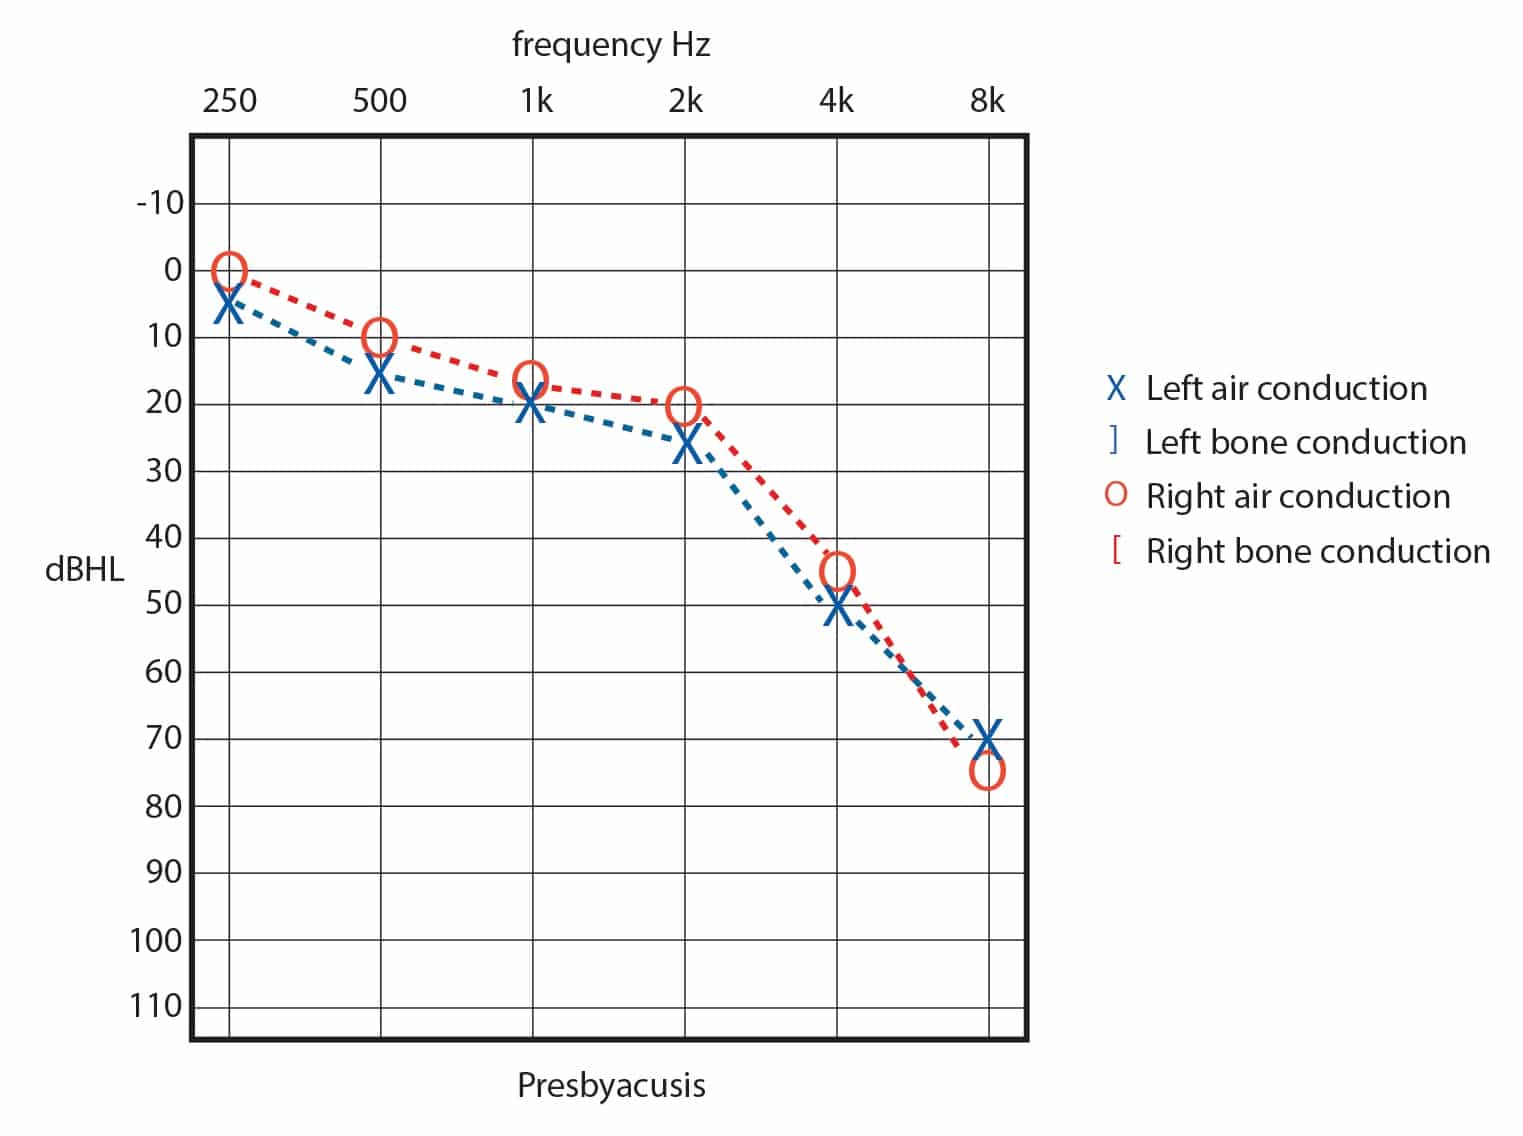 Audiogram of presbycusis showing a decrease in hearing ability from 250 hertz to 8,000 hertz